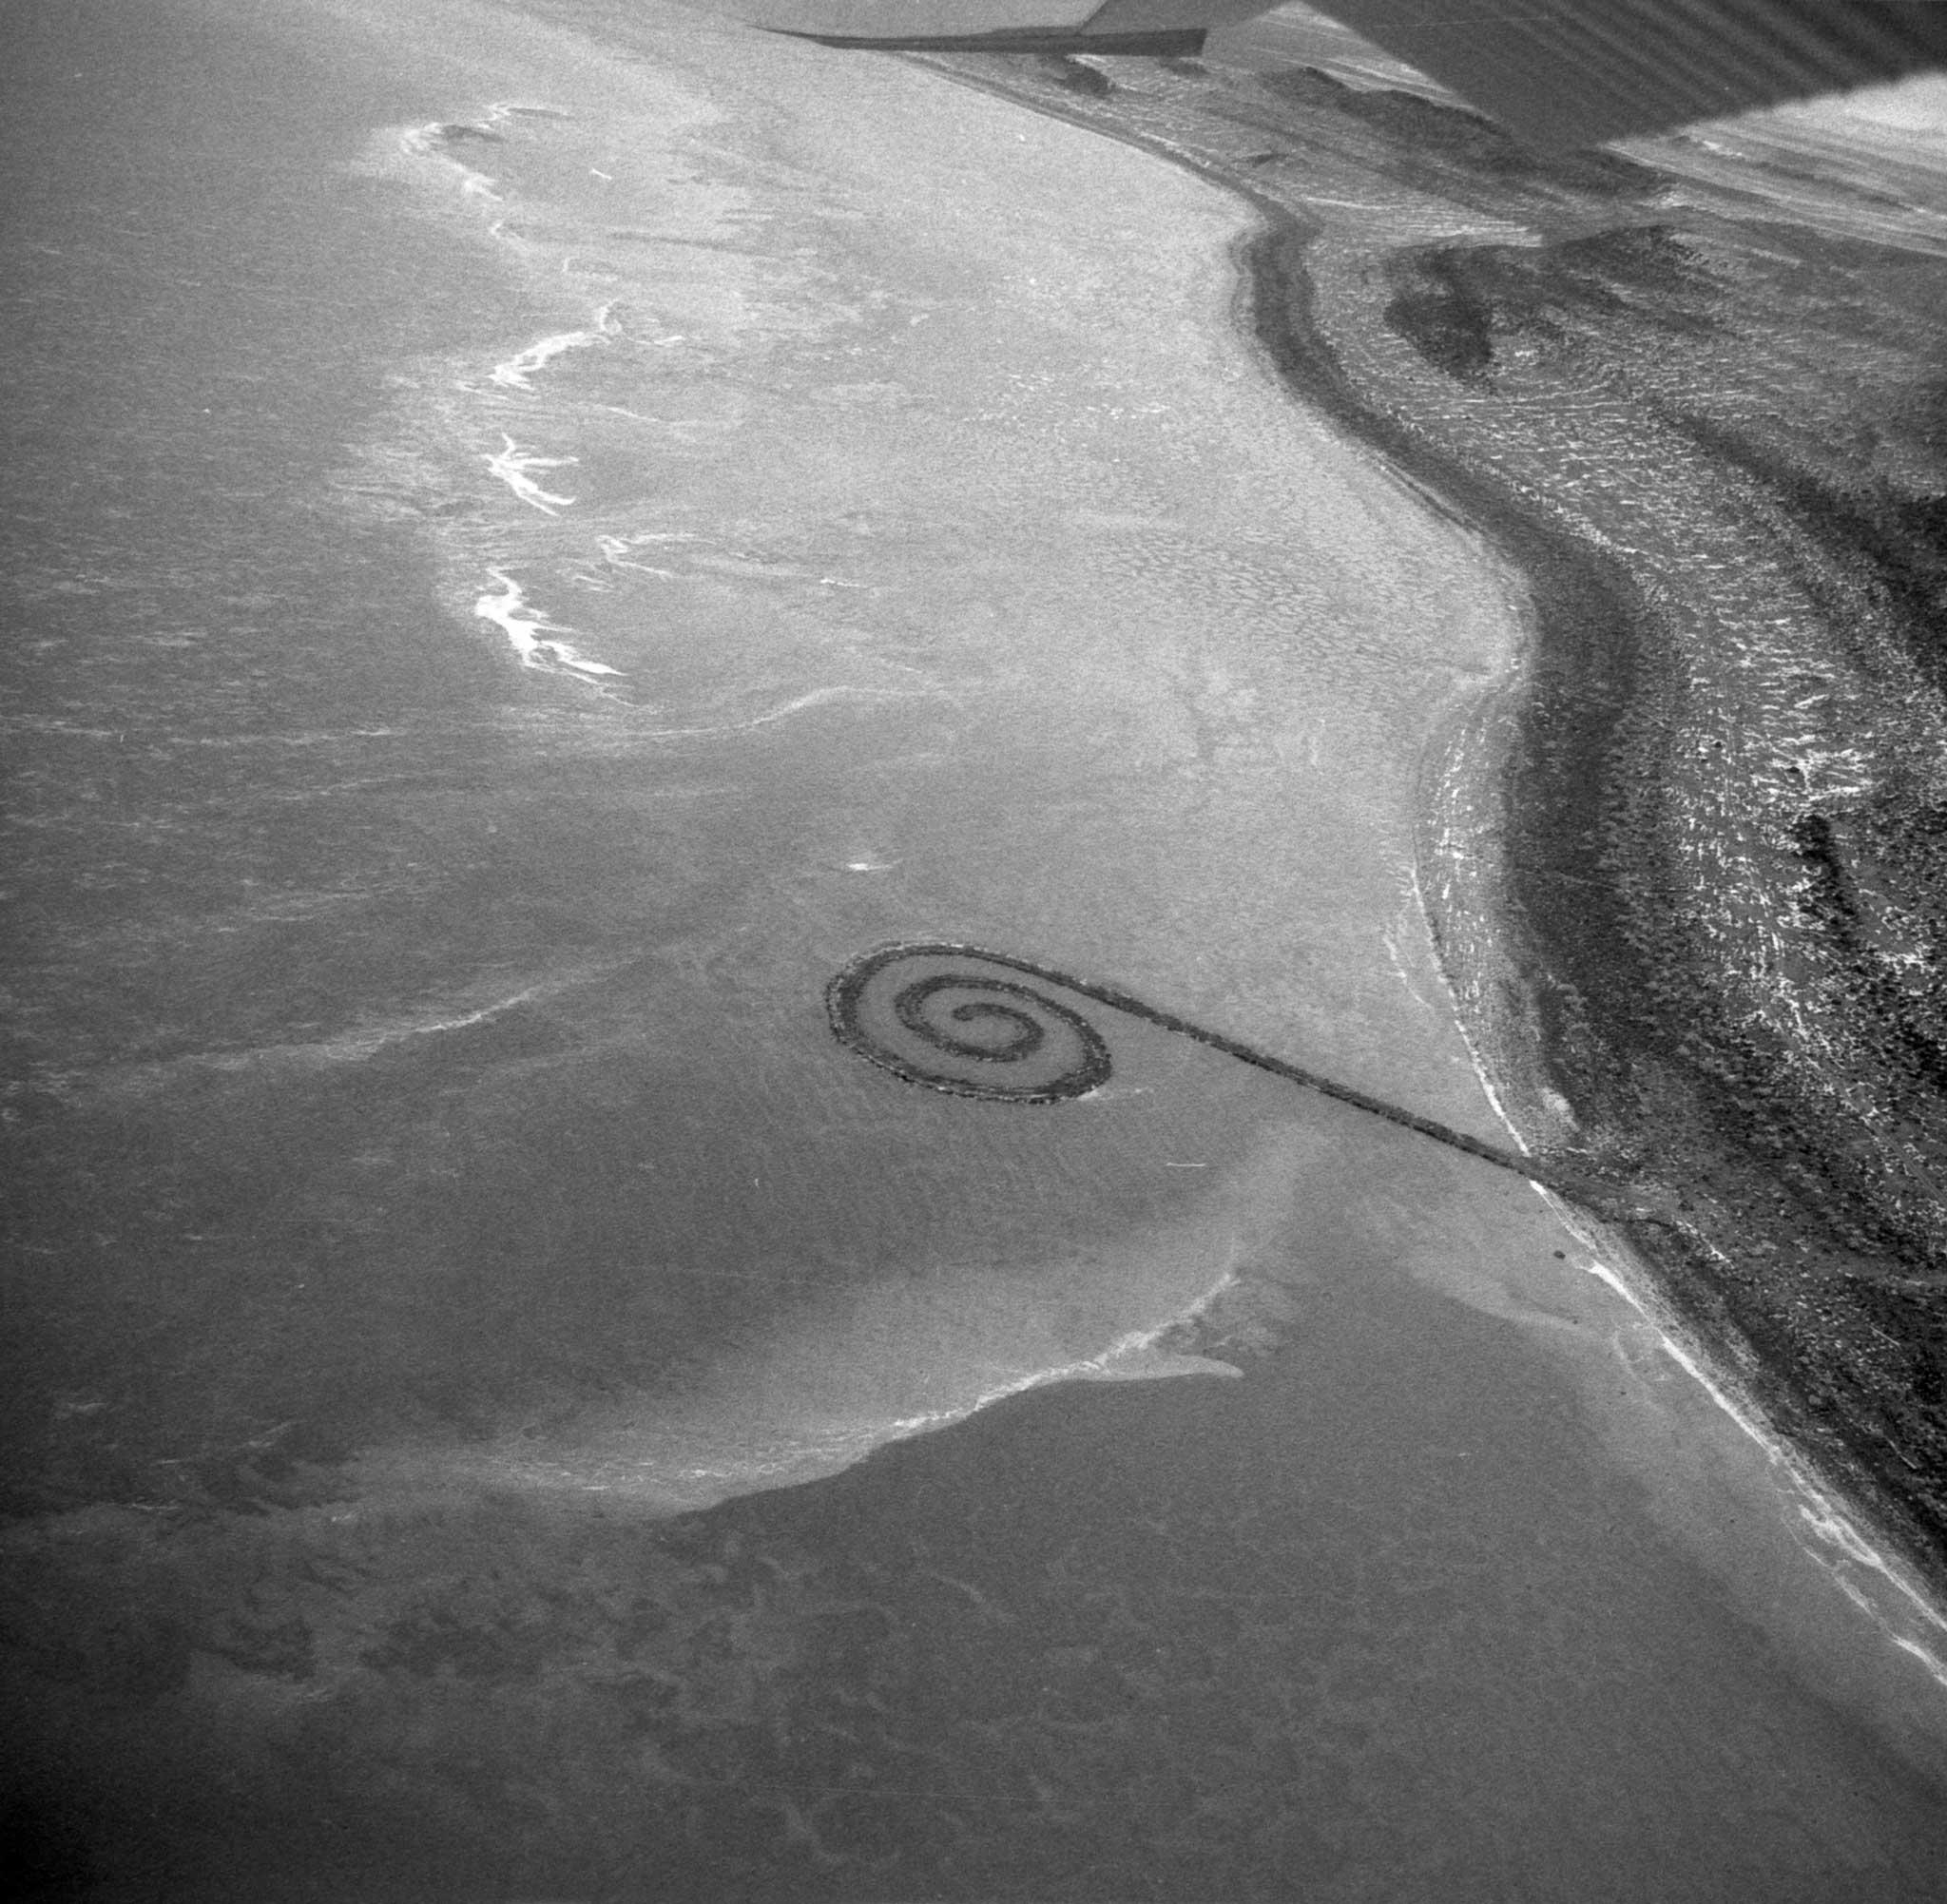 black and white, aerial image or an earthen jetty with a spiral termination extending out from the shore into a body of water 